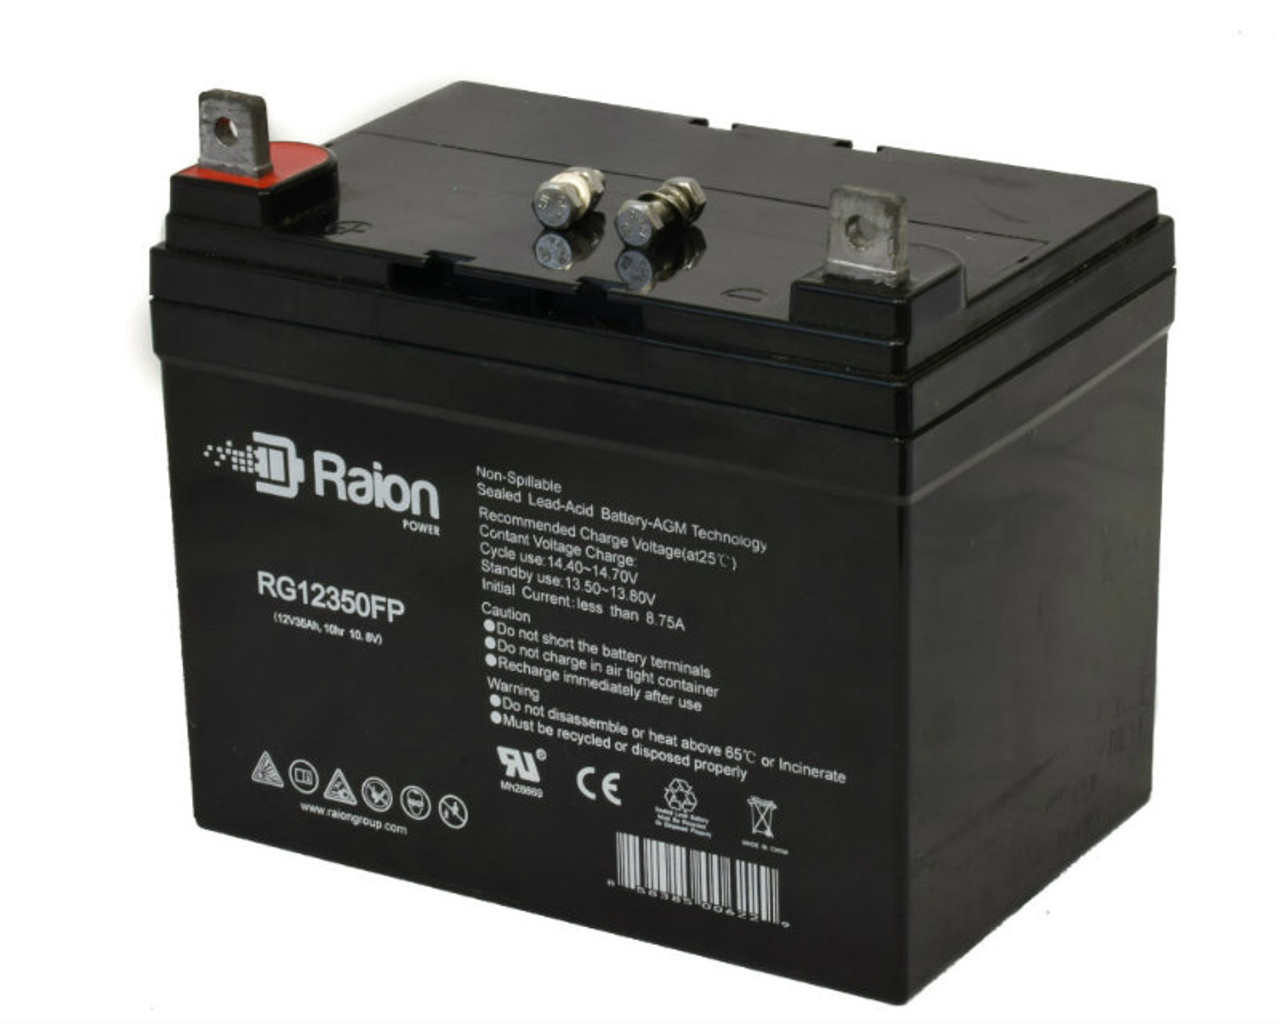 Raion Power Replacement 12V 35Ah RG12350FP Battery for Helios FB12-35